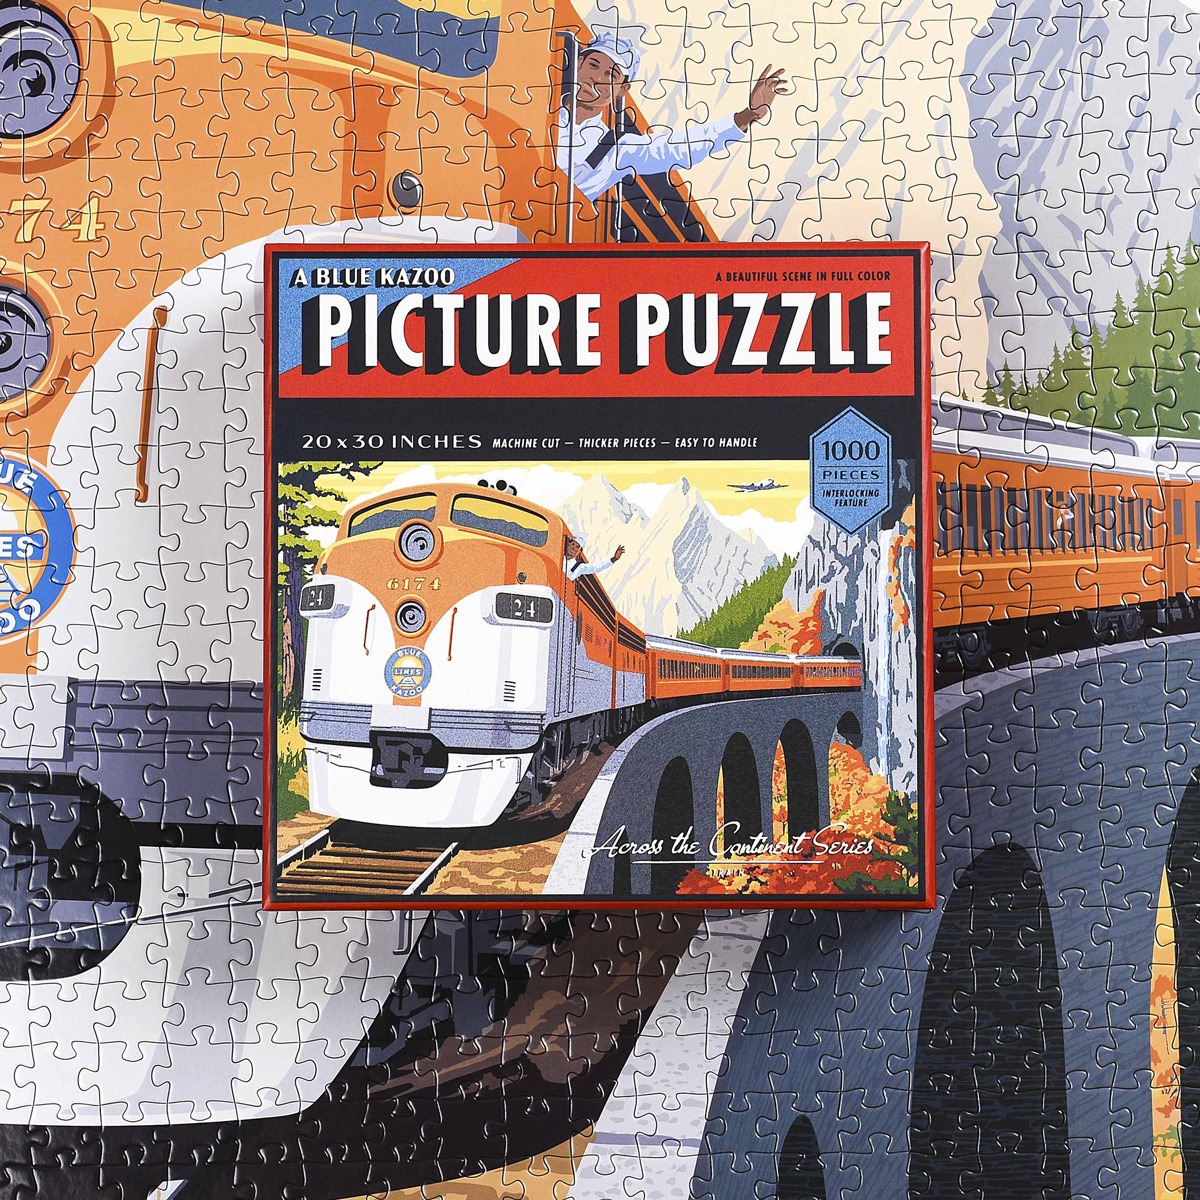 Across the Continent - A Vintage Travel Series Train Jigsaw Puzzle